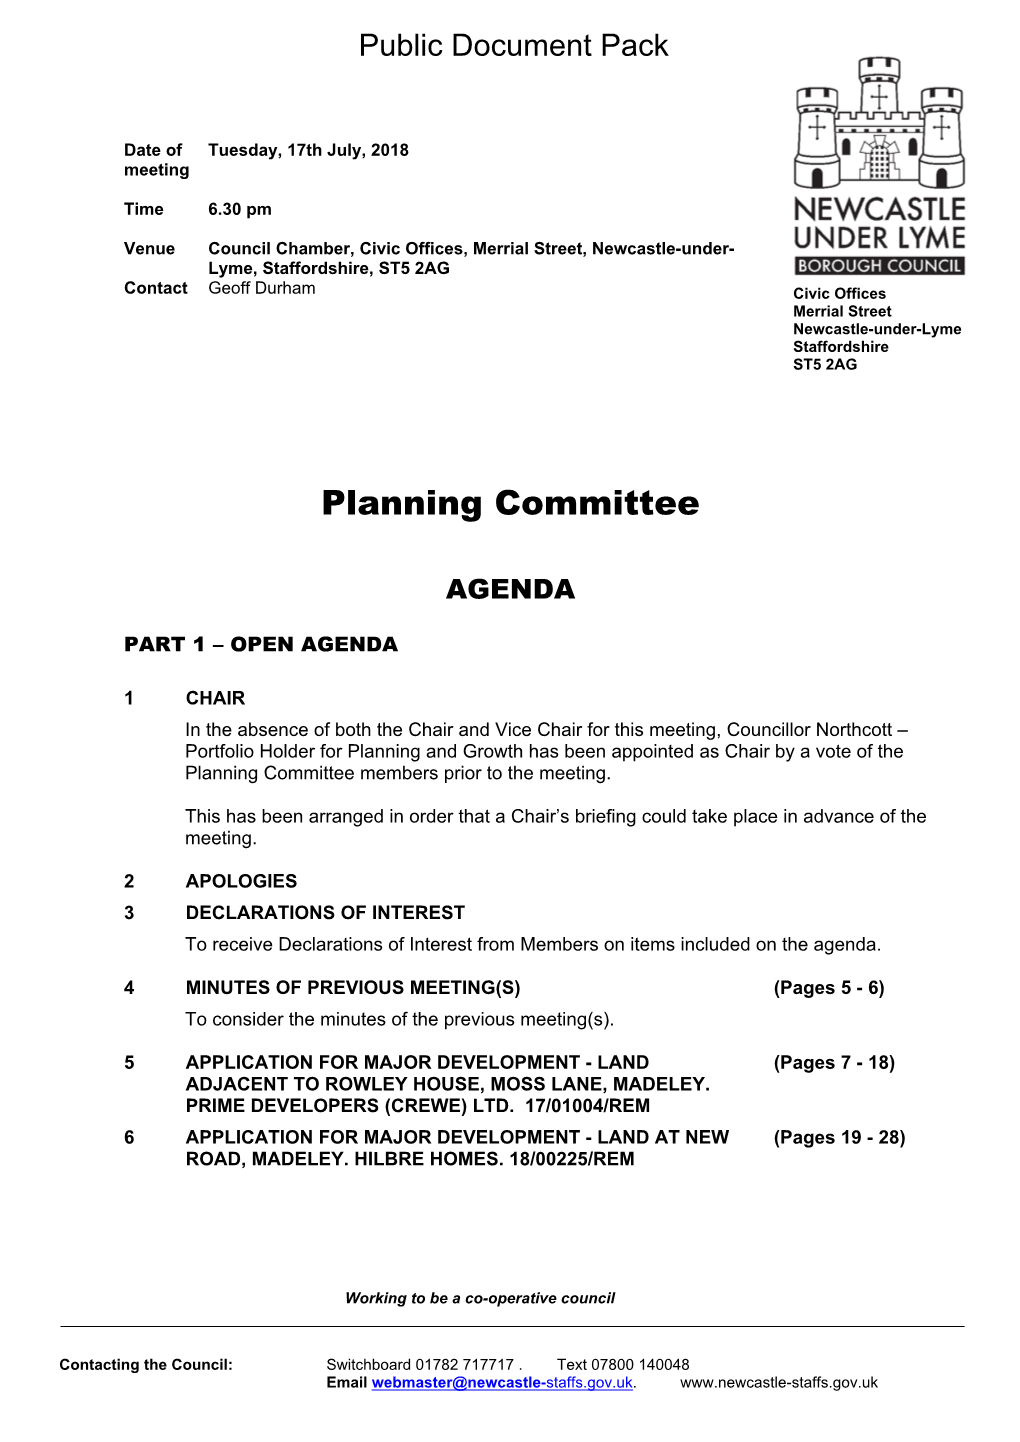 Agenda Document for Planning Committee, 17/07/2018 18:30